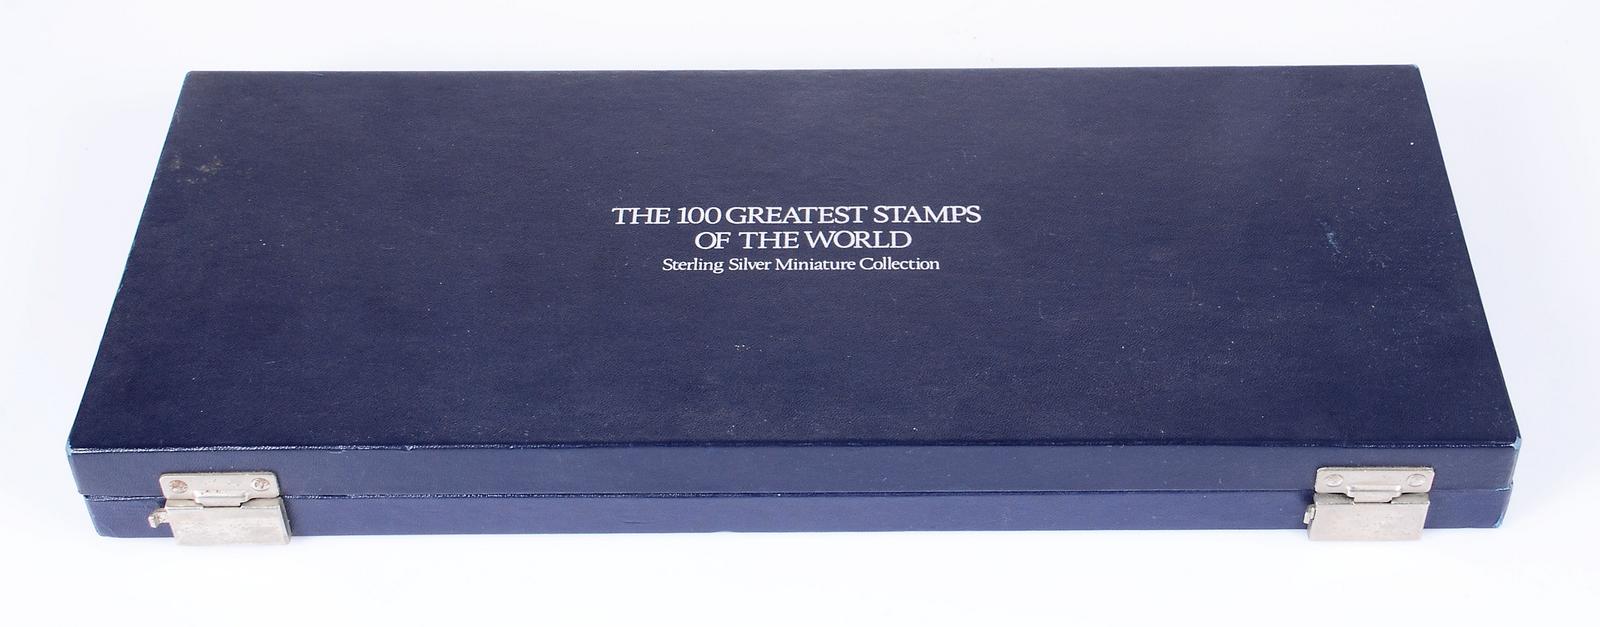 100 Greatest Stamps of the World, sterling silver miniature 